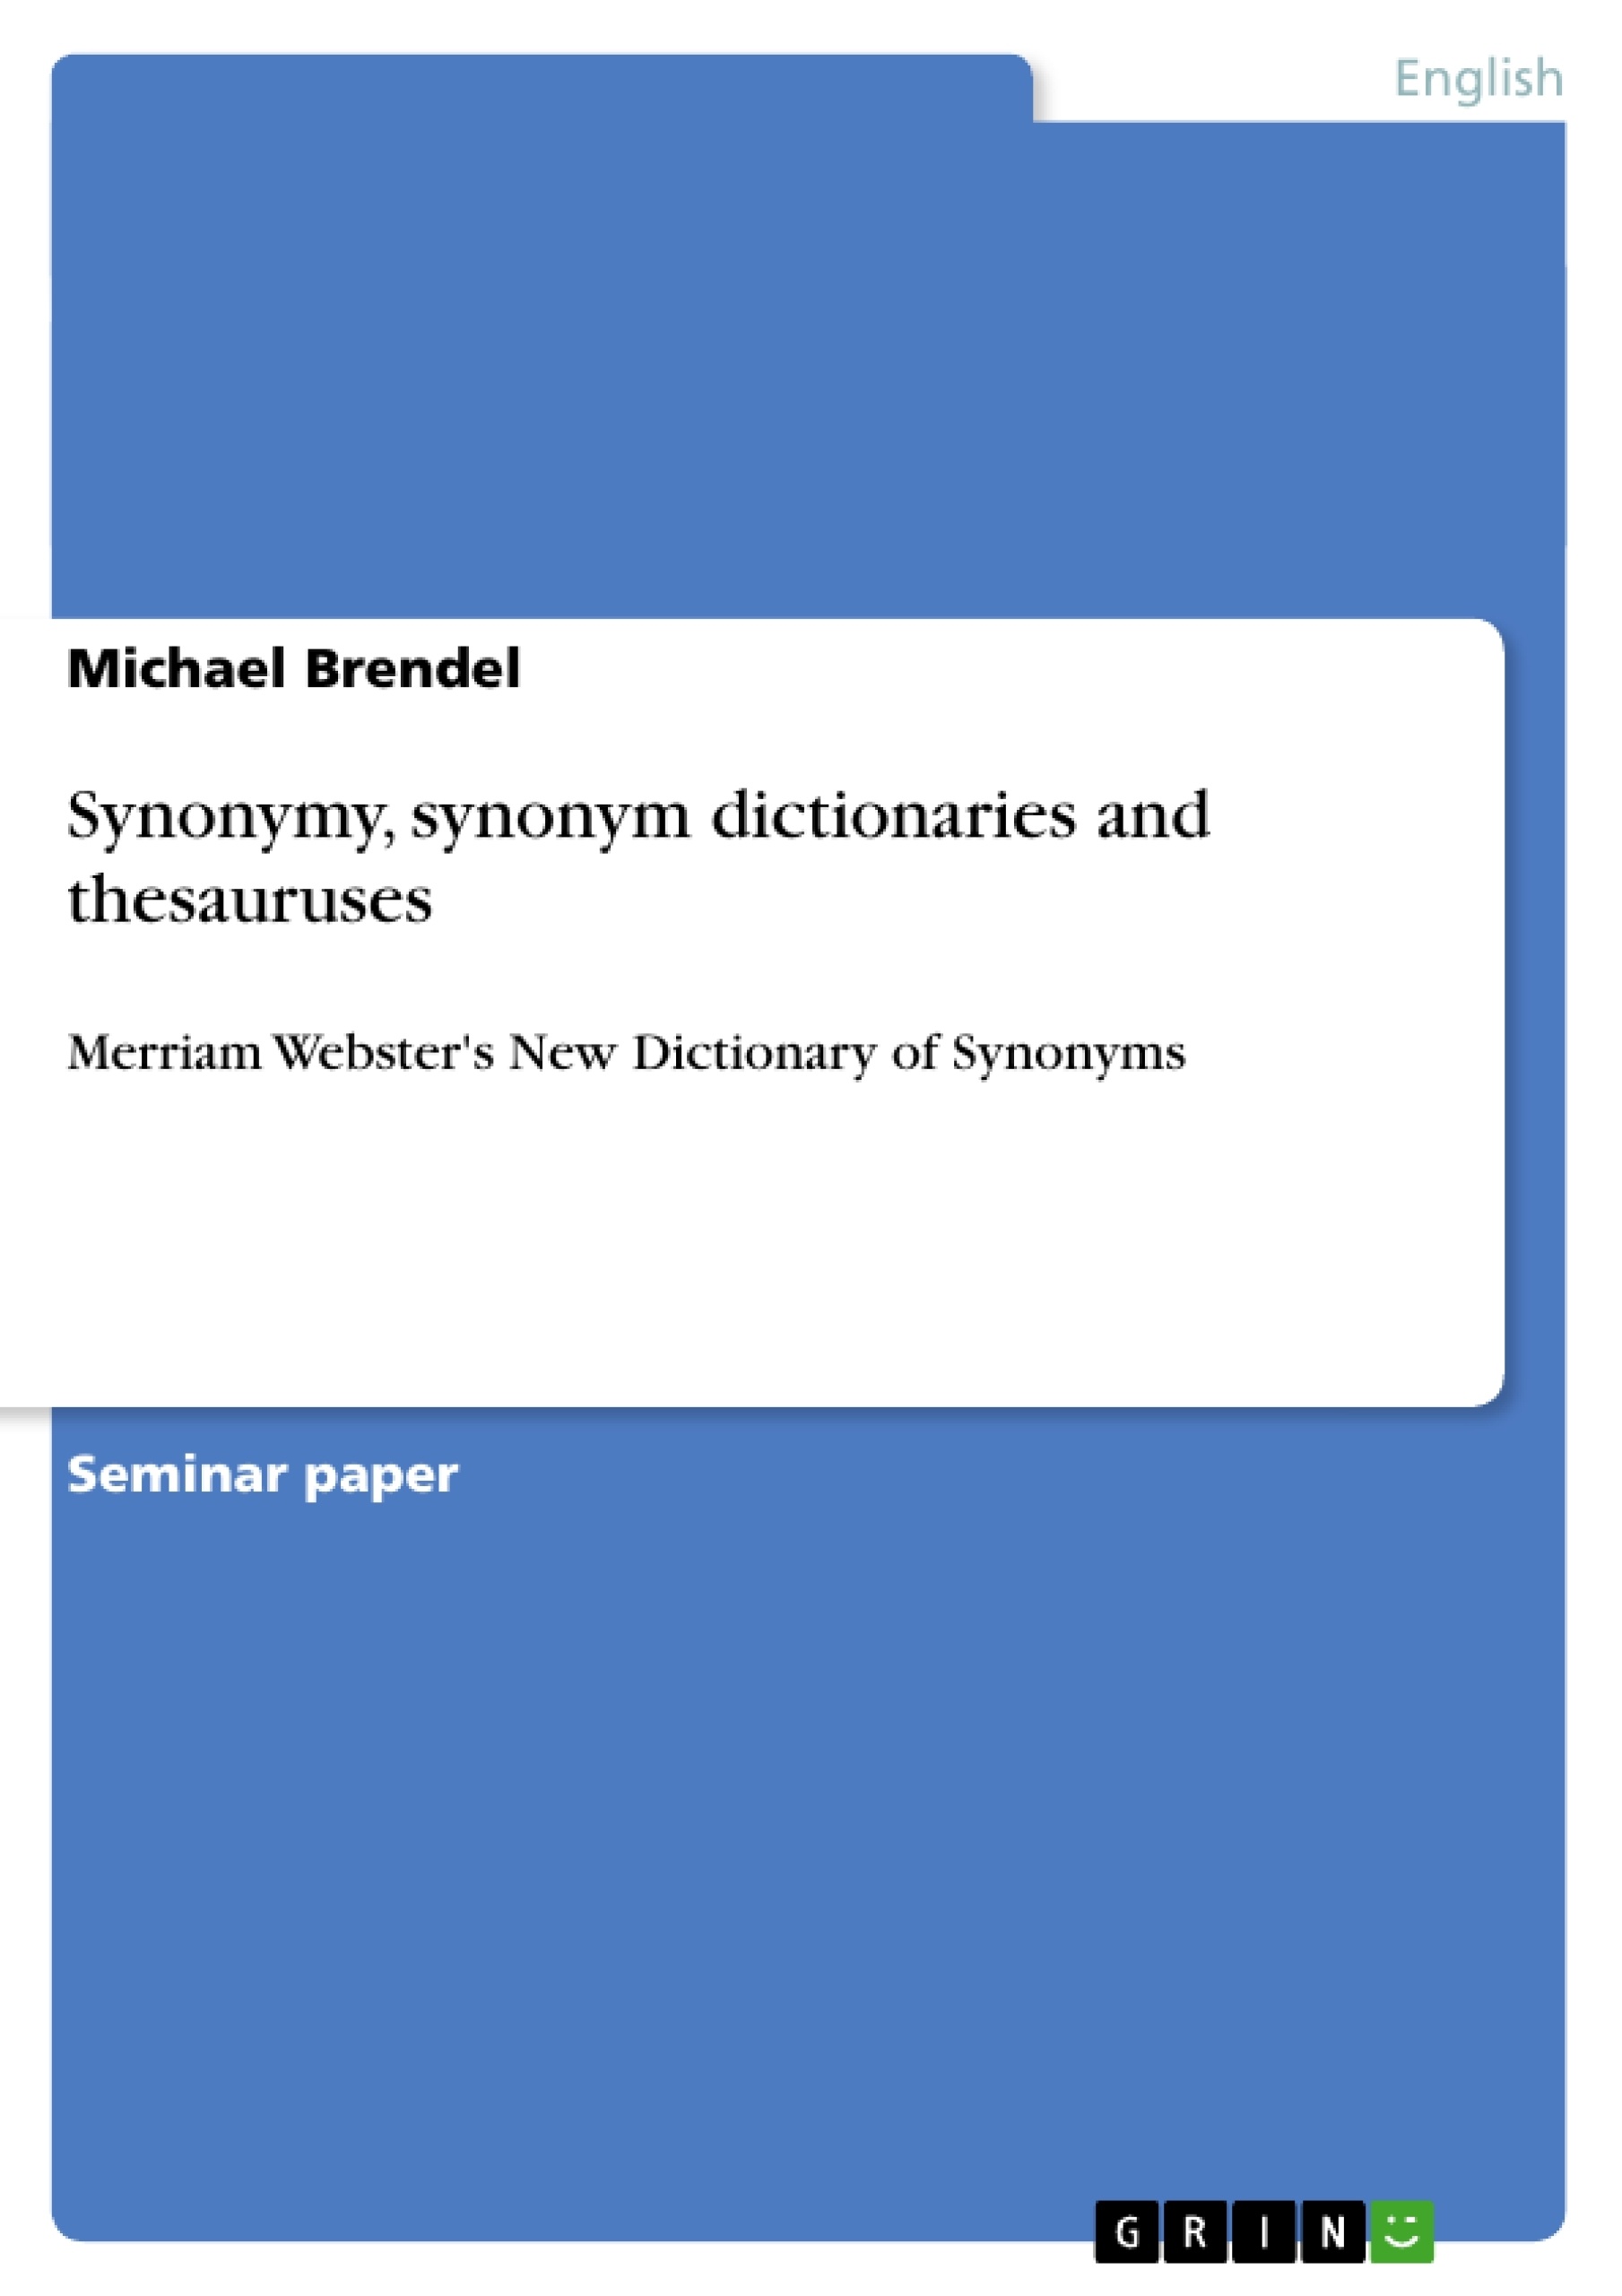 Synonymy, synonym dictionaries and thesauruses - GRIN